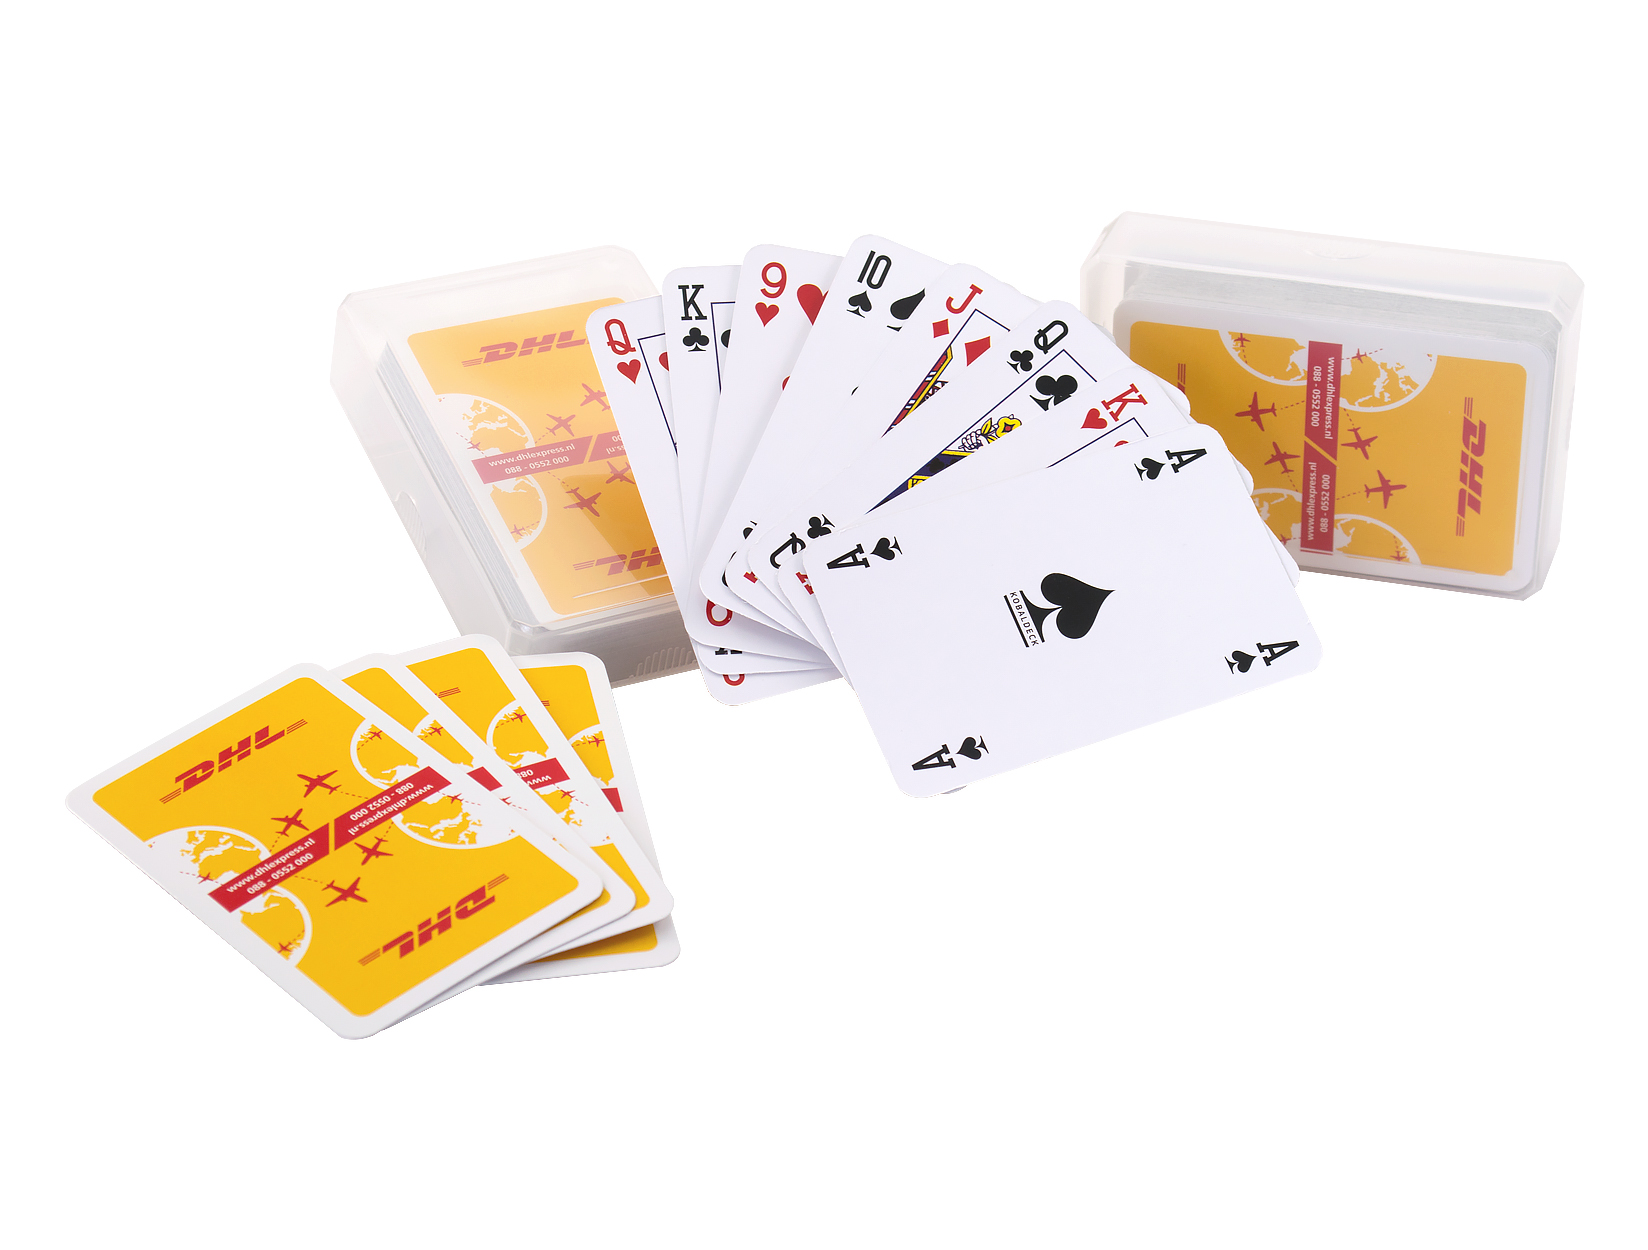 Personalized deck of cards in a plastic box - JCA02